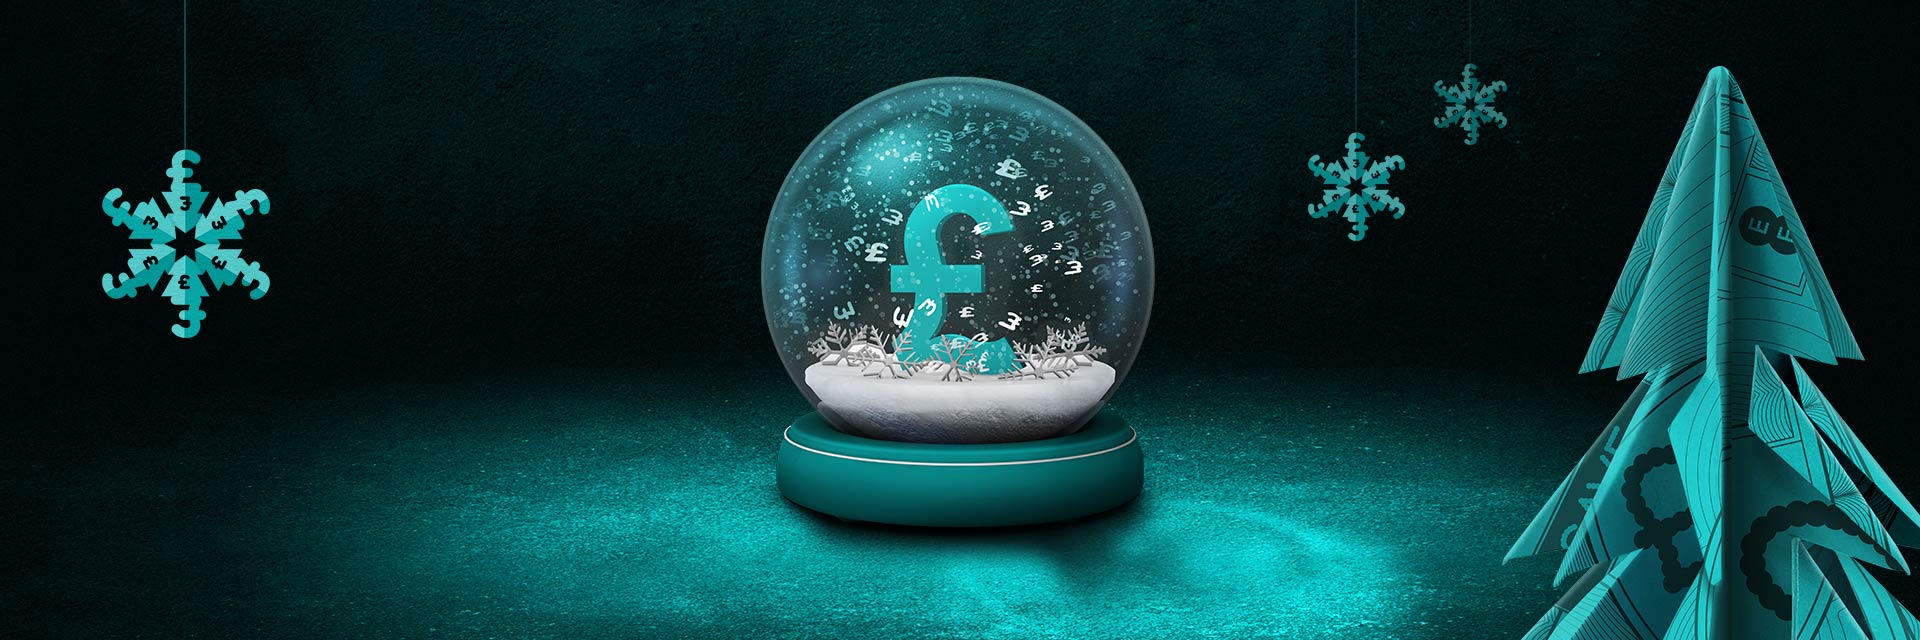  Christmas snow globe with a £ sign inside 